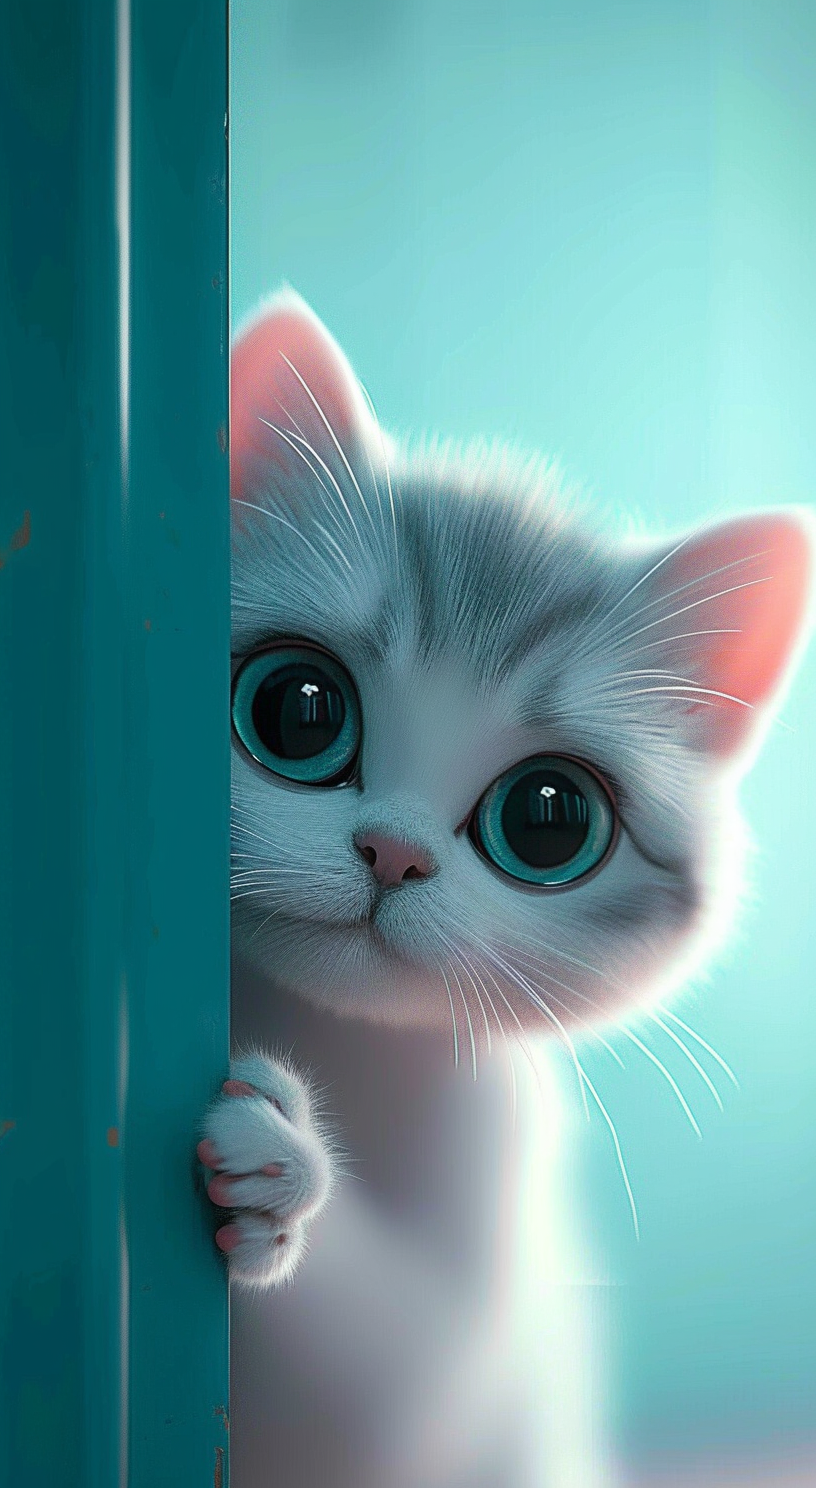 Experience the serene charm of our playful kitten peeking from a teal door.